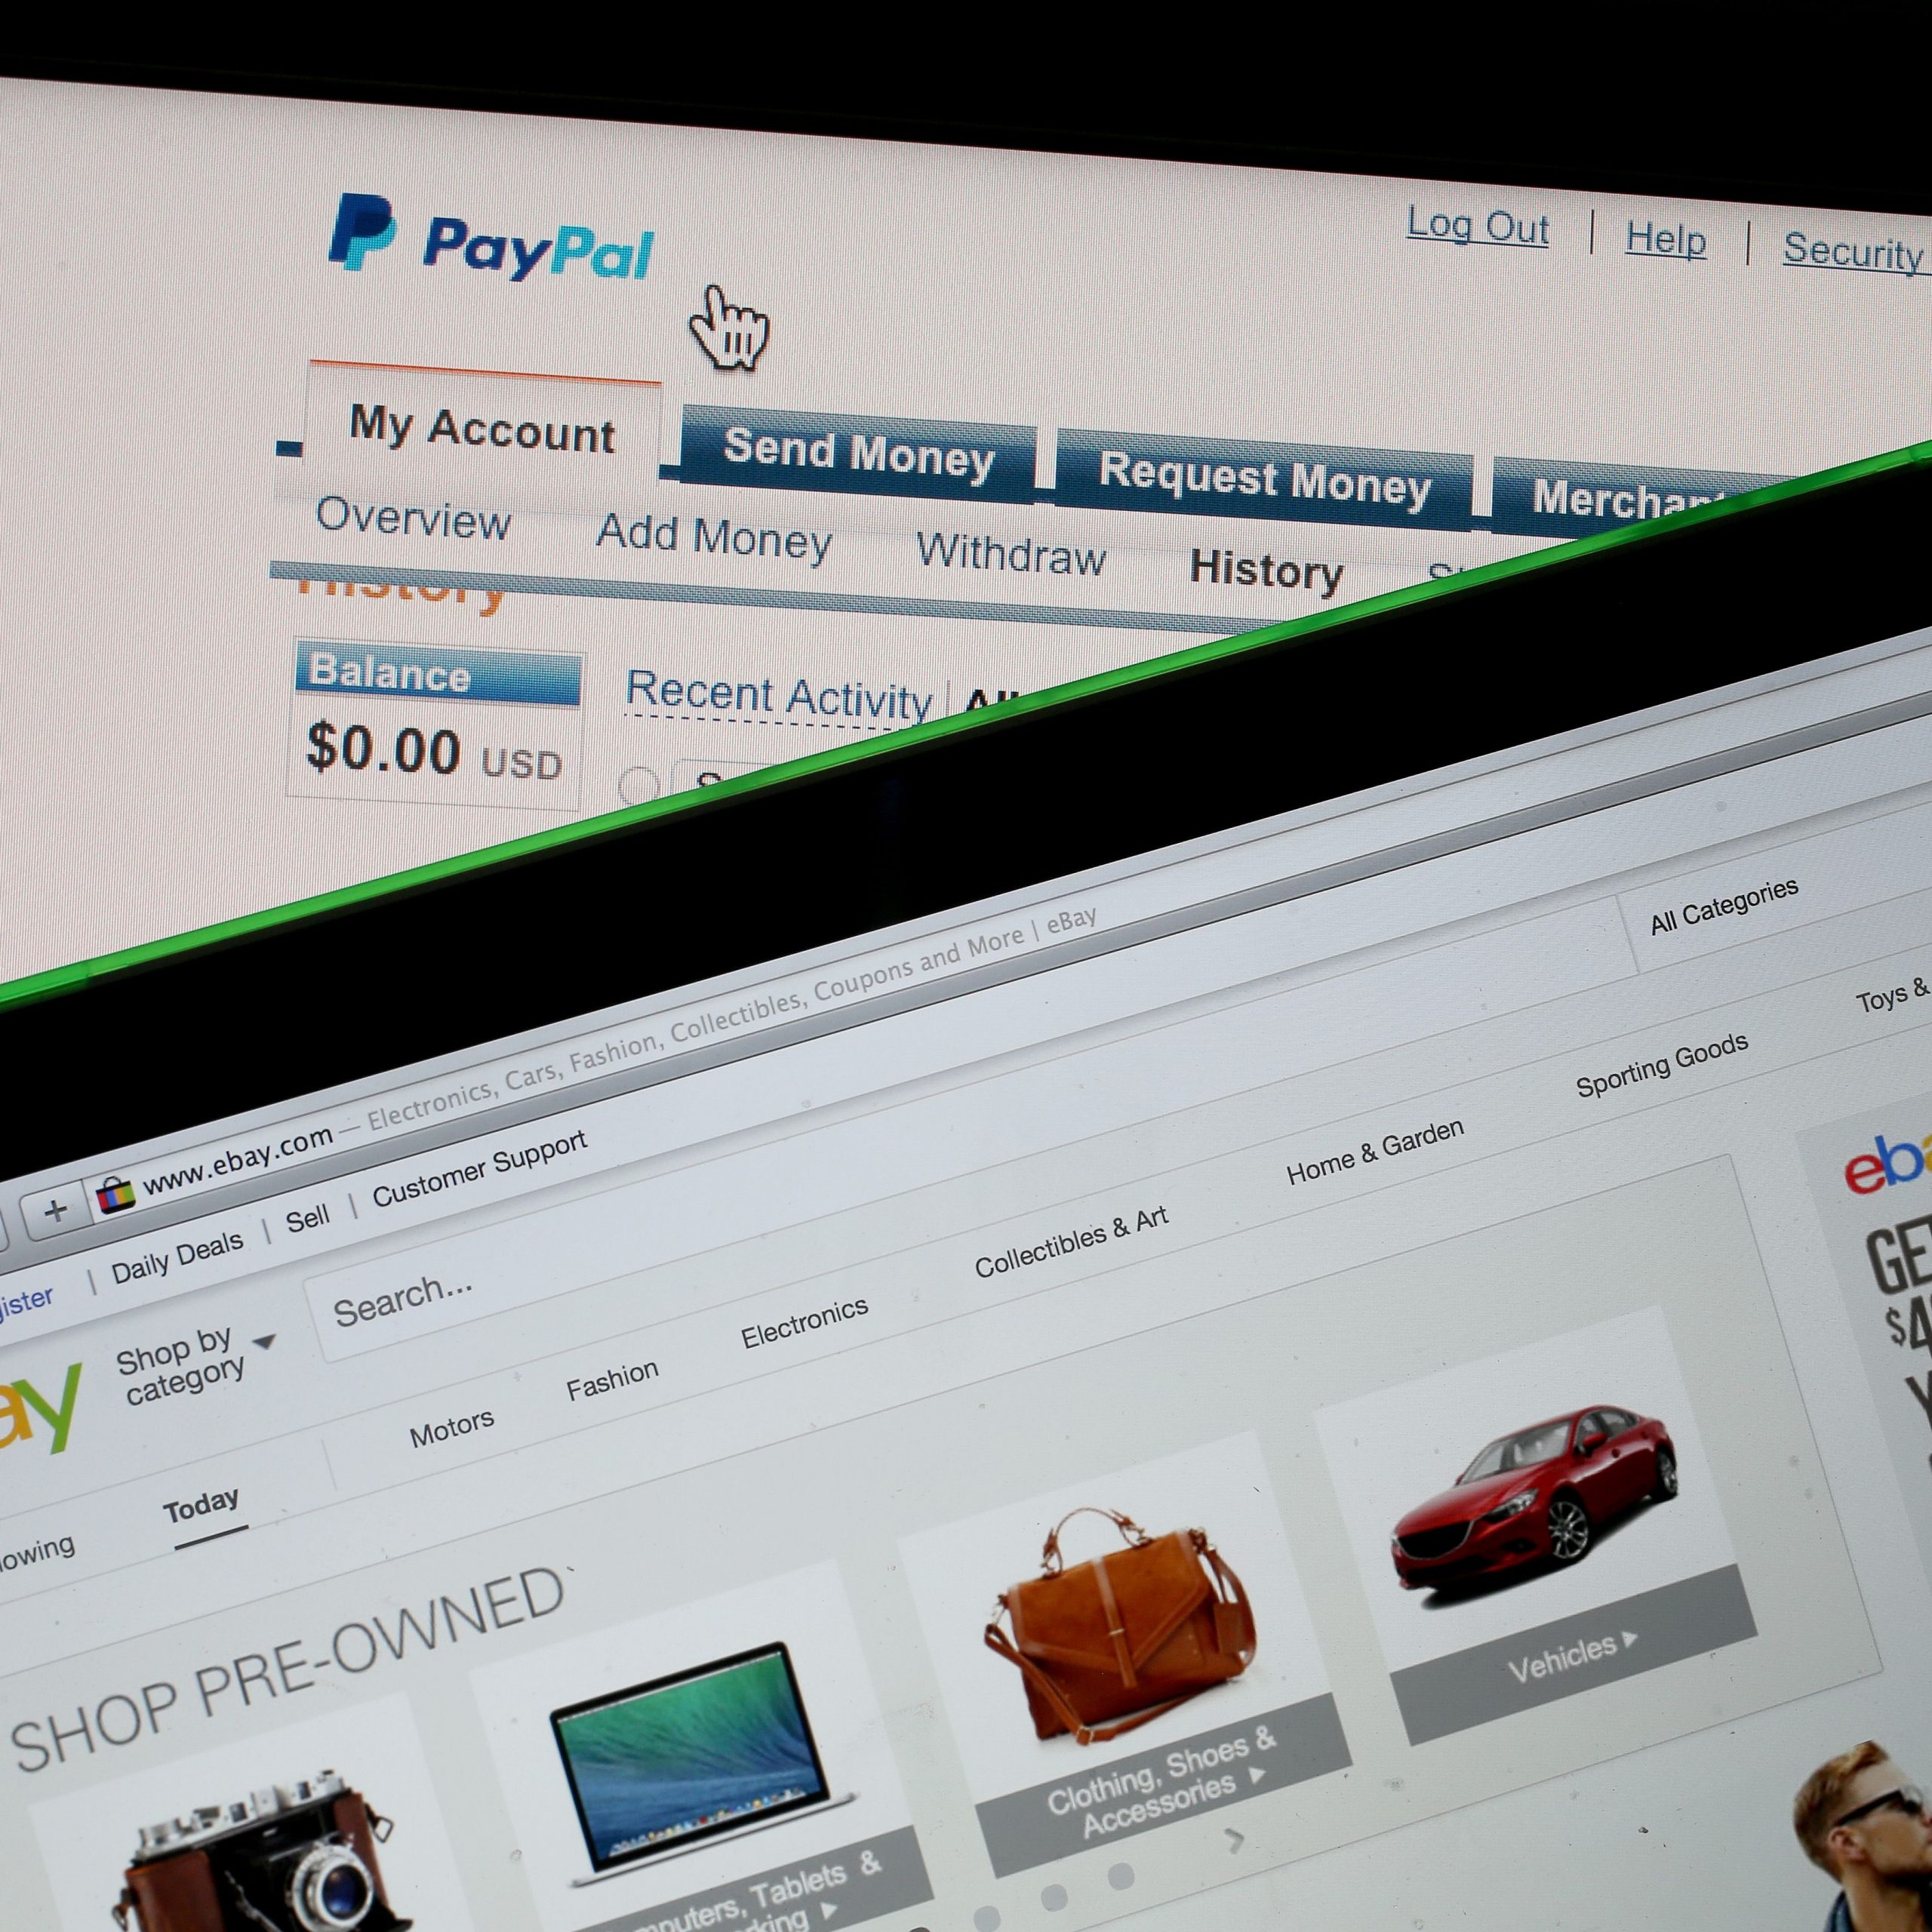 How to Unlink a PayPal Account from a Nintendo Account